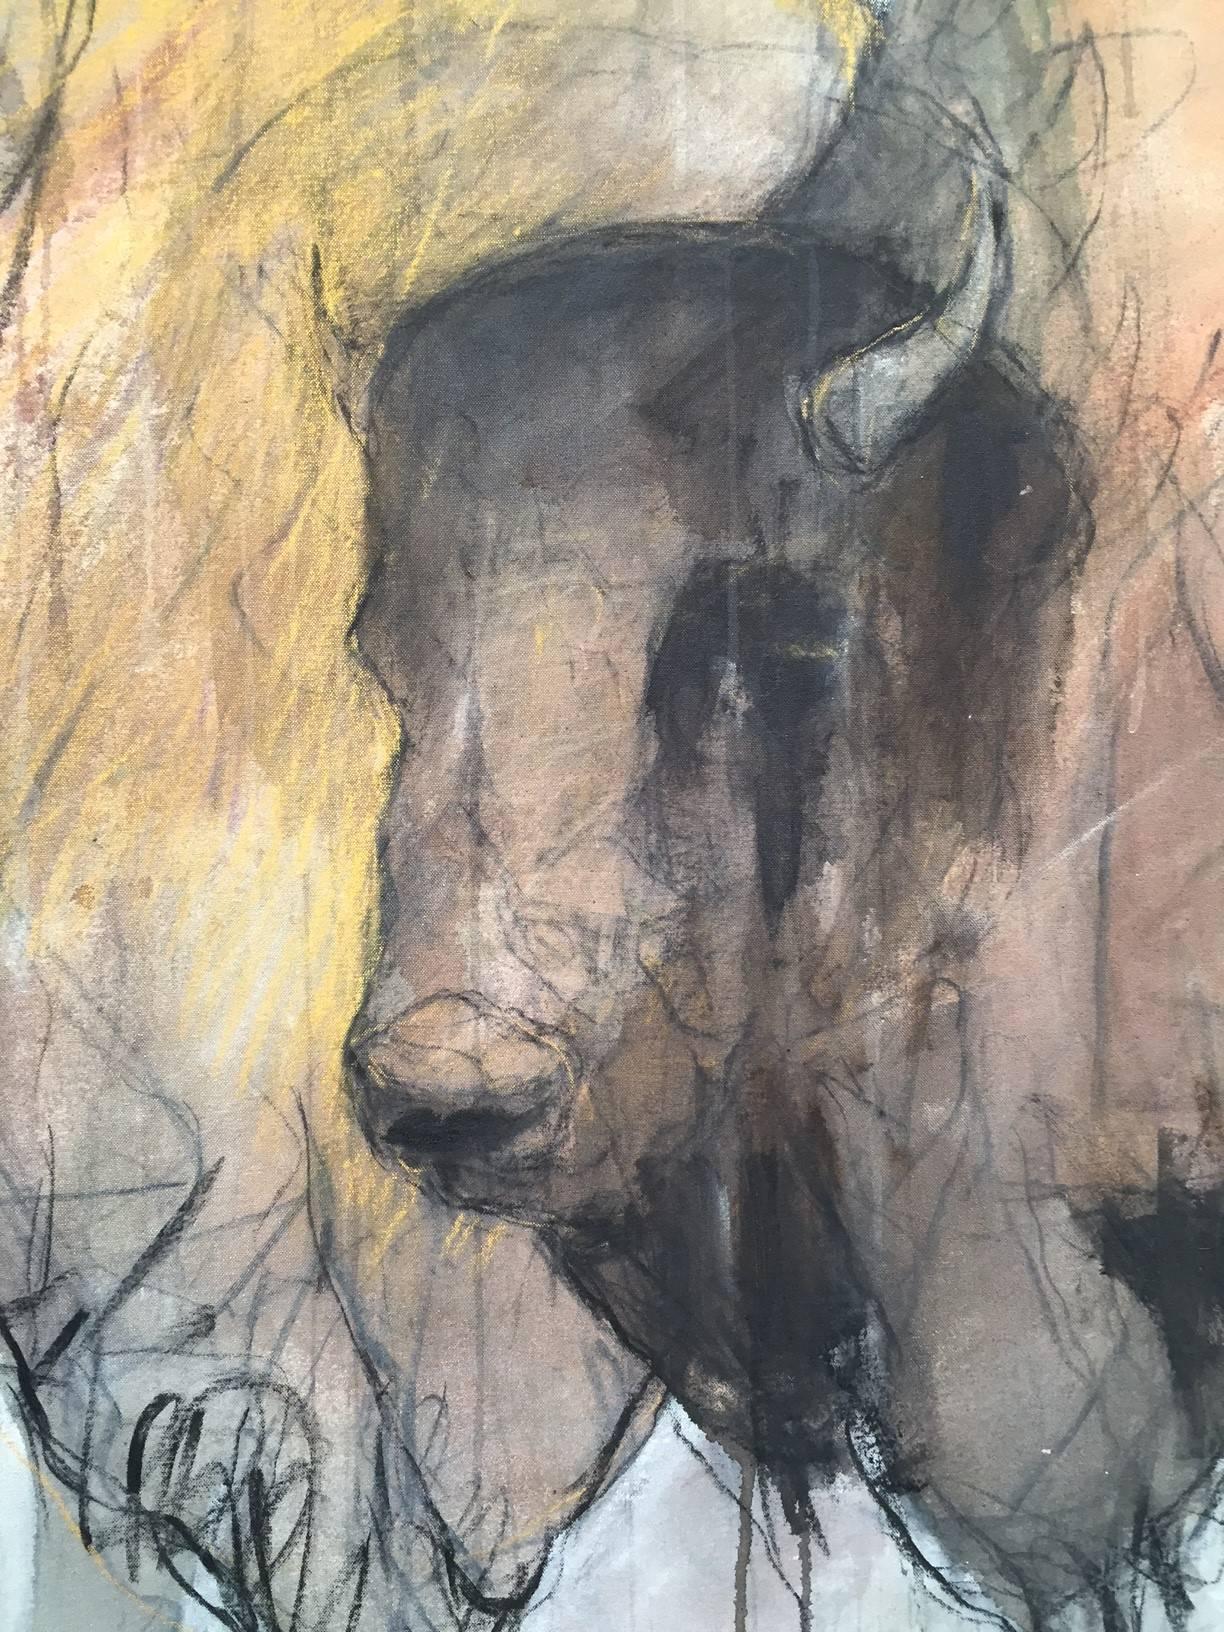 Helen Durant has been experimenting with paint, torn paper, graphite, and found objects for most of her life. From a formal painting class at the old Atlanta School of Art to her current studio at Goat Farm, Durant has invented her own ways of